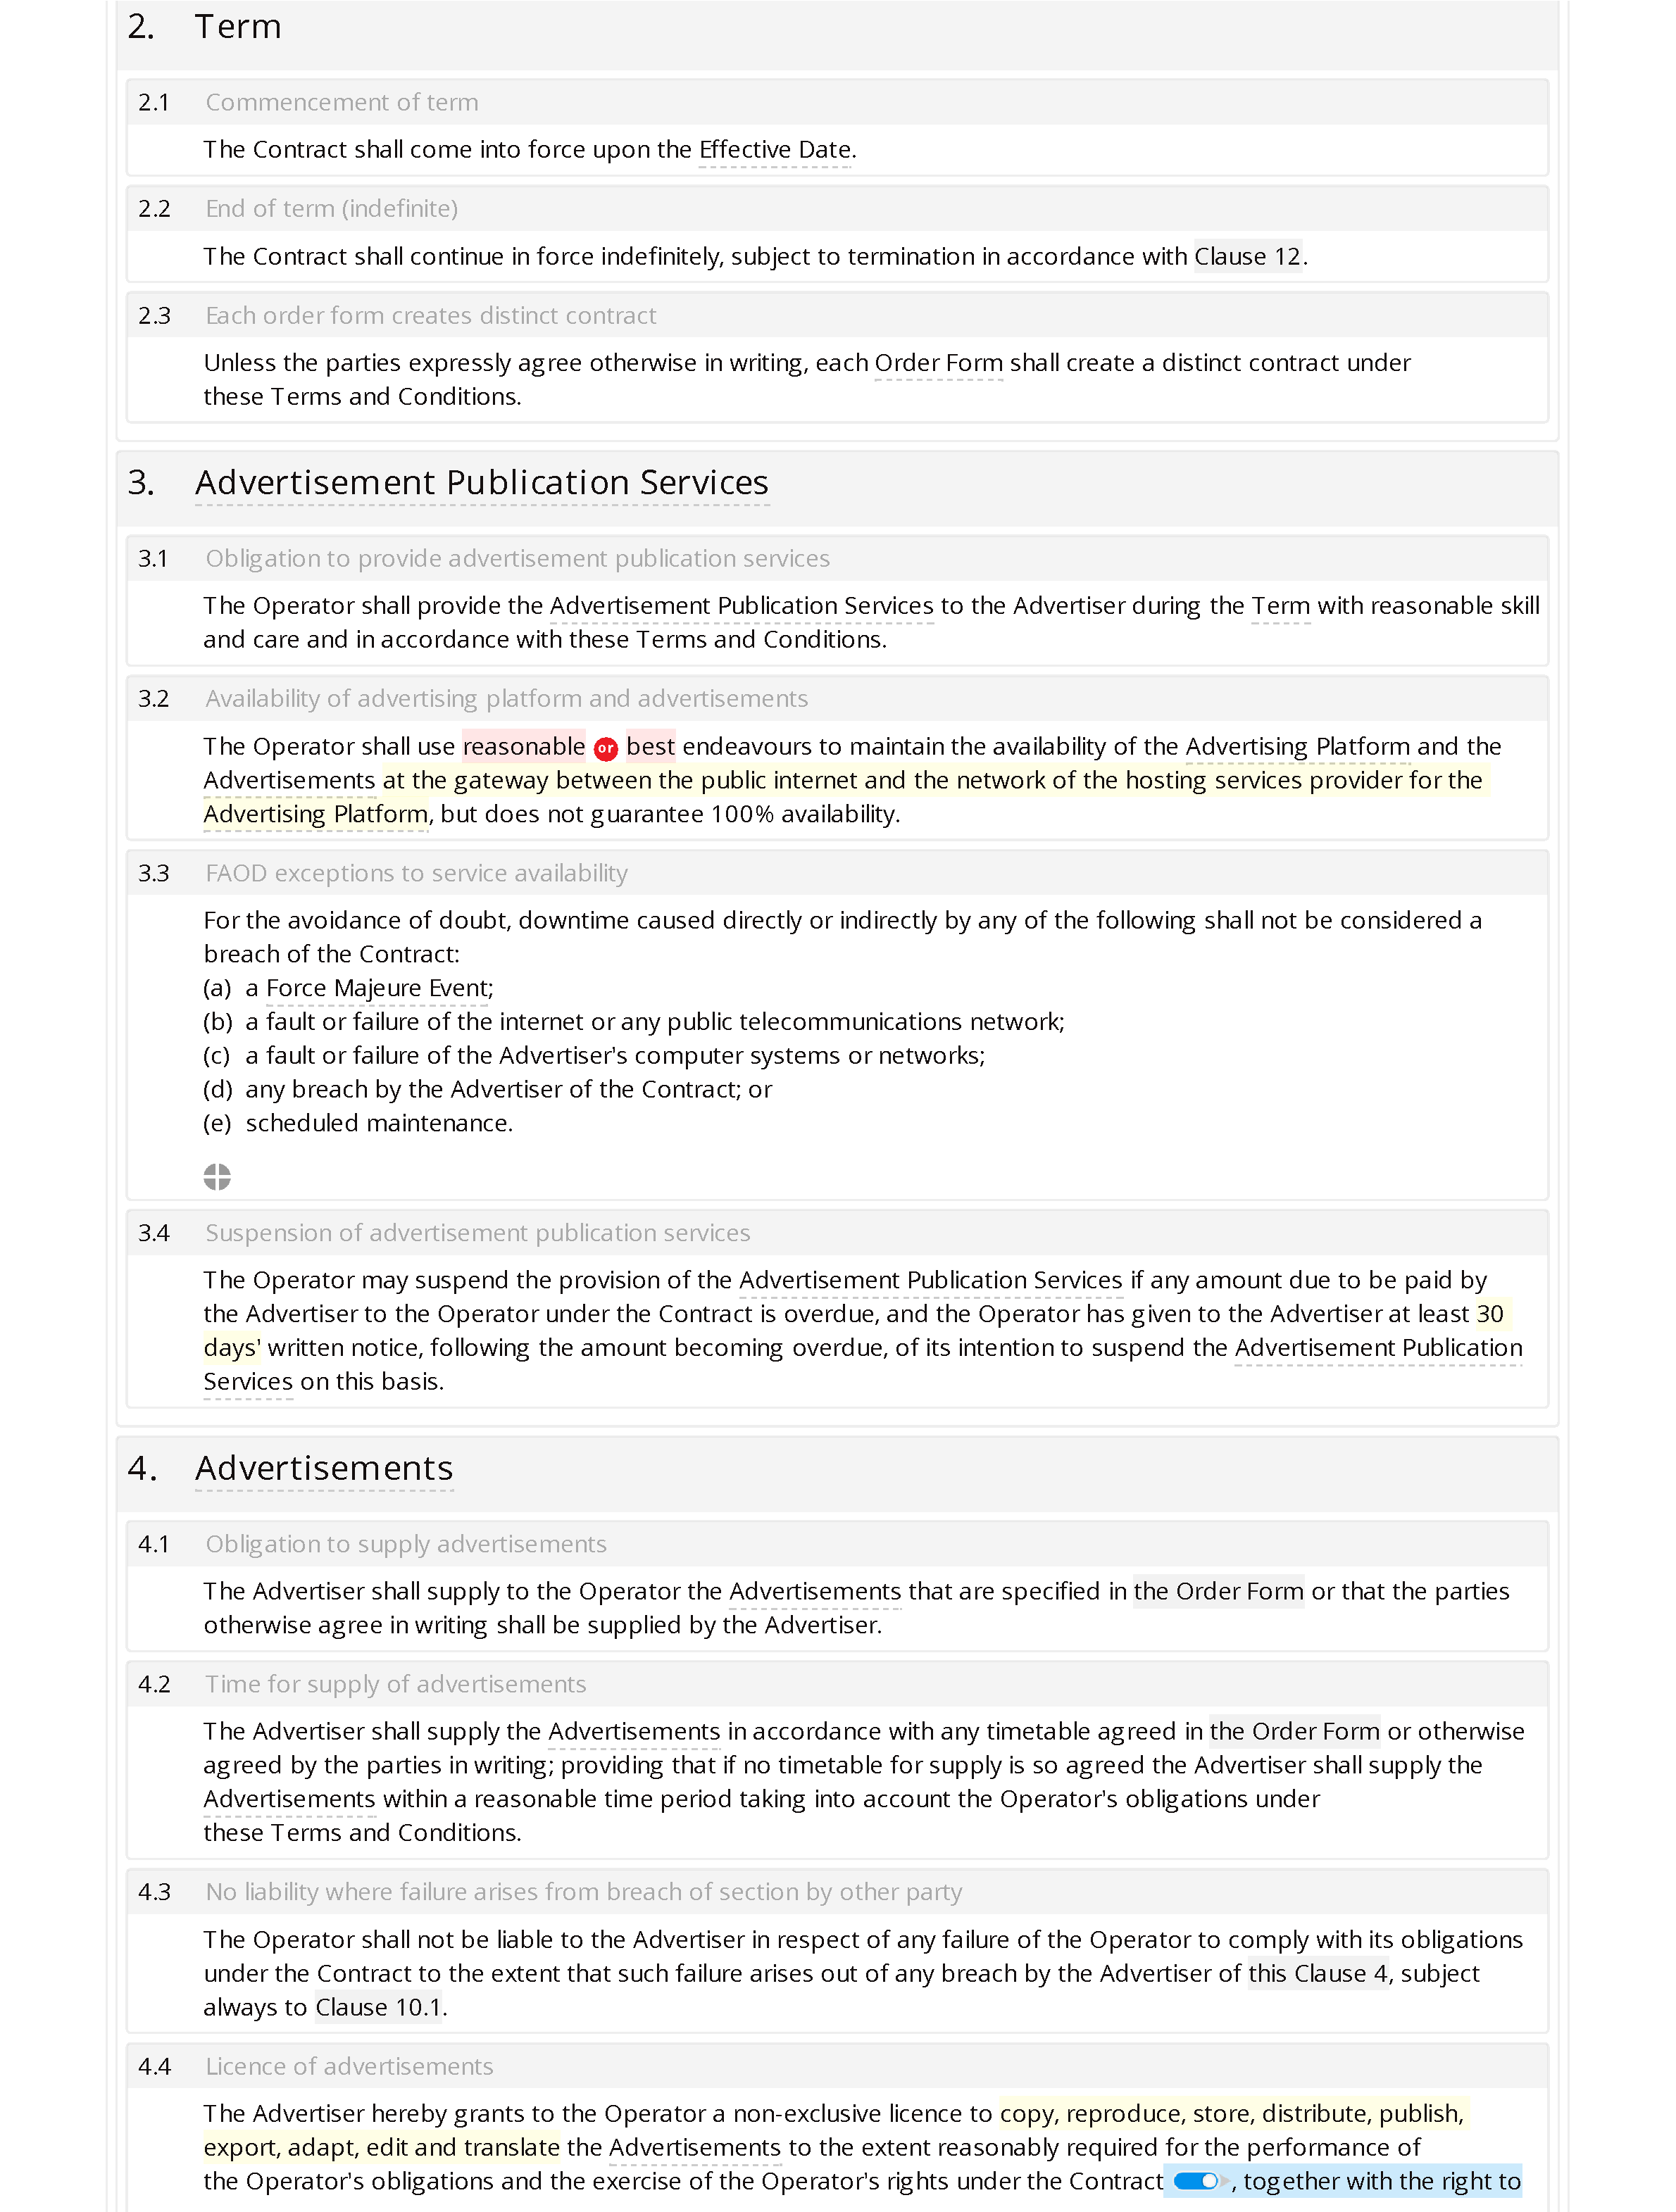 Website advertising terms and conditions document editor preview